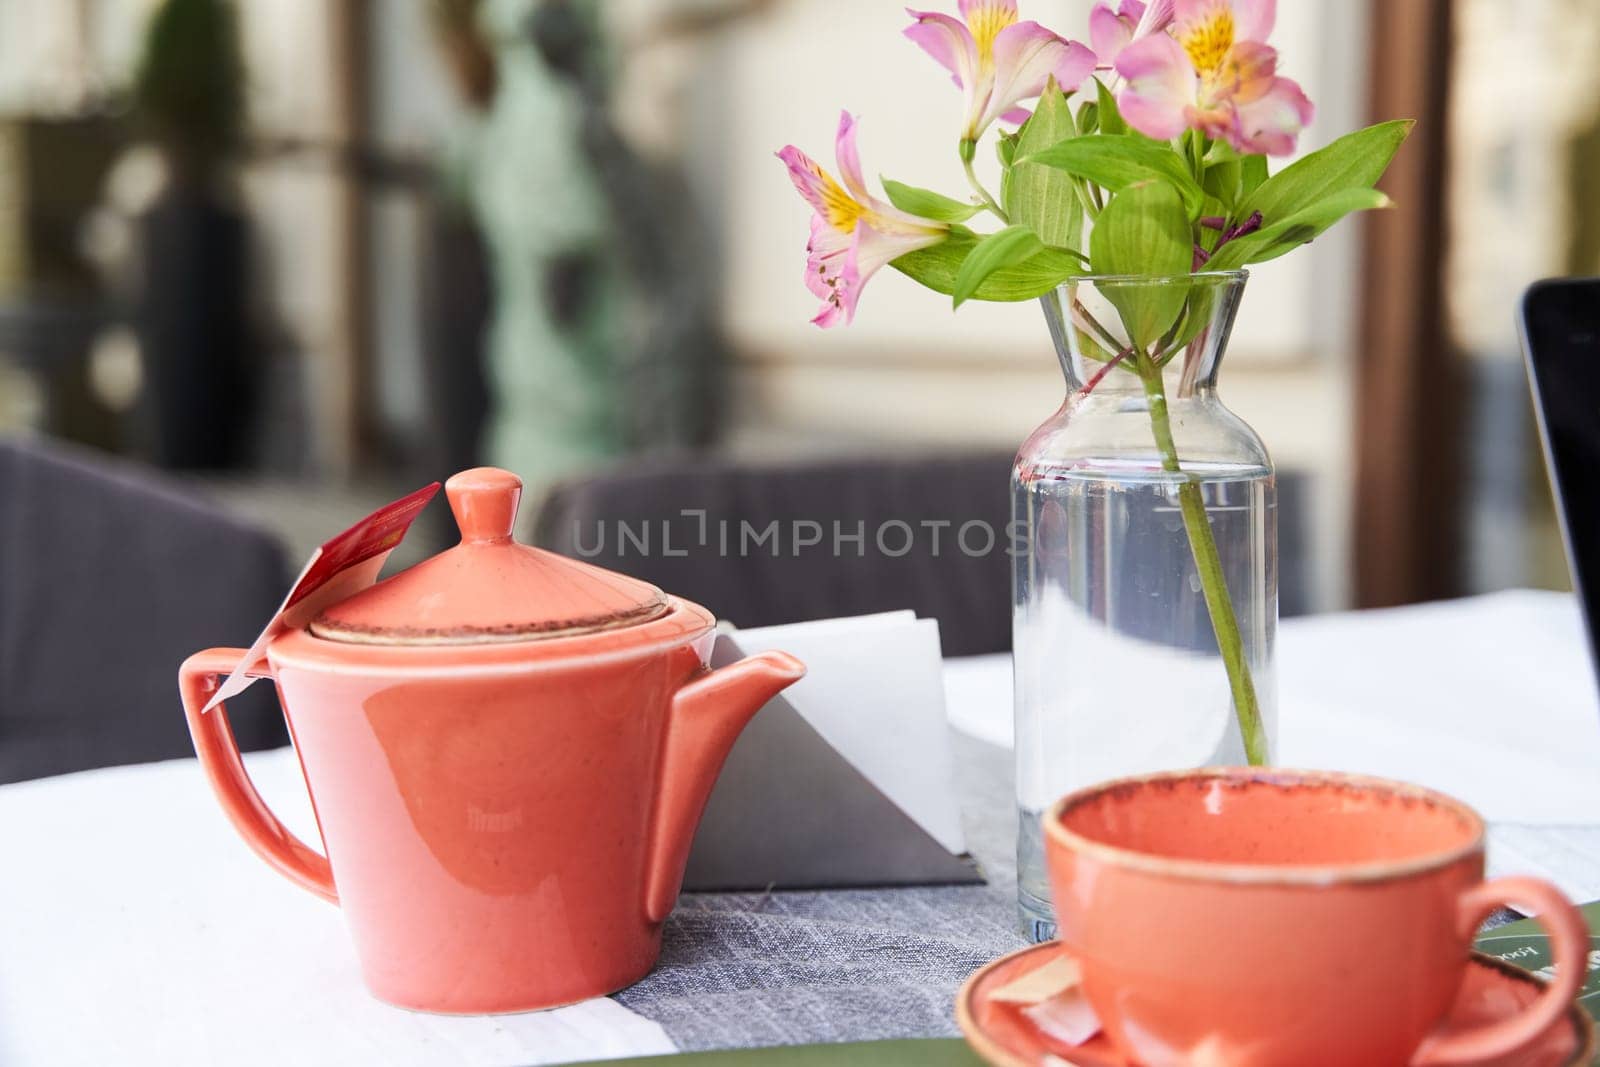 Tbilisi, Georgia - 22.04.2021: Flowers in a vase, a teapot and a cup on the table in a summer outdoor cafe by driver-s